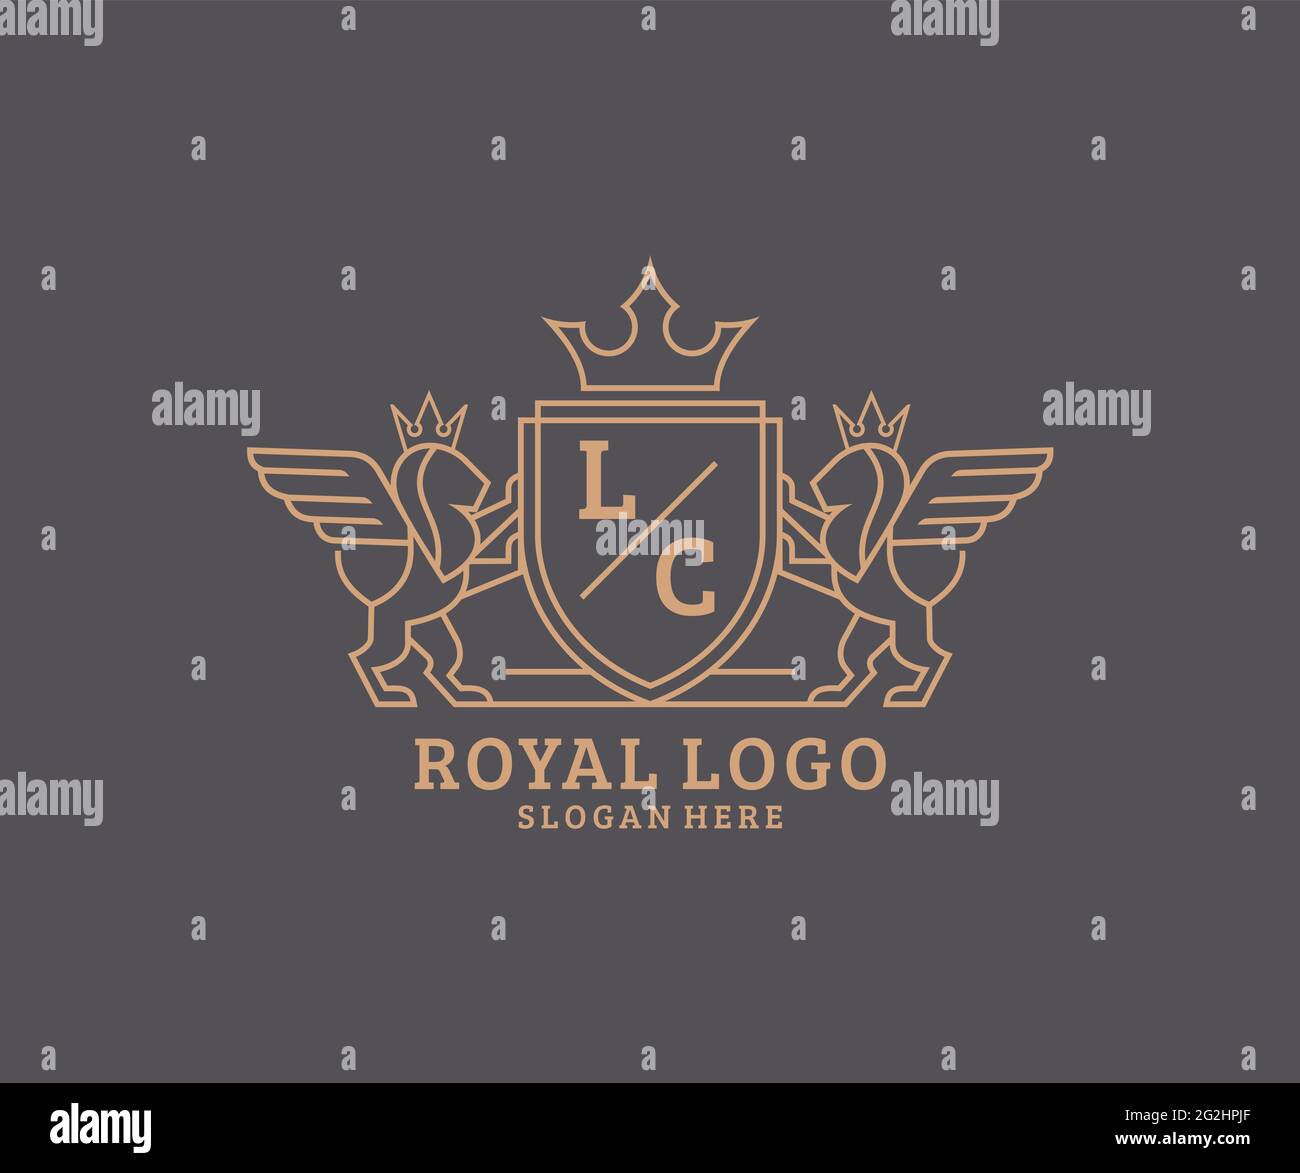 LC Letter Lion Royal Luxury Heraldic,Crest Logo template in vector art for Restaurant, Royalty, Boutique, Cafe, Hotel, Heraldic, Jewelry, Fashion and Stock Vector